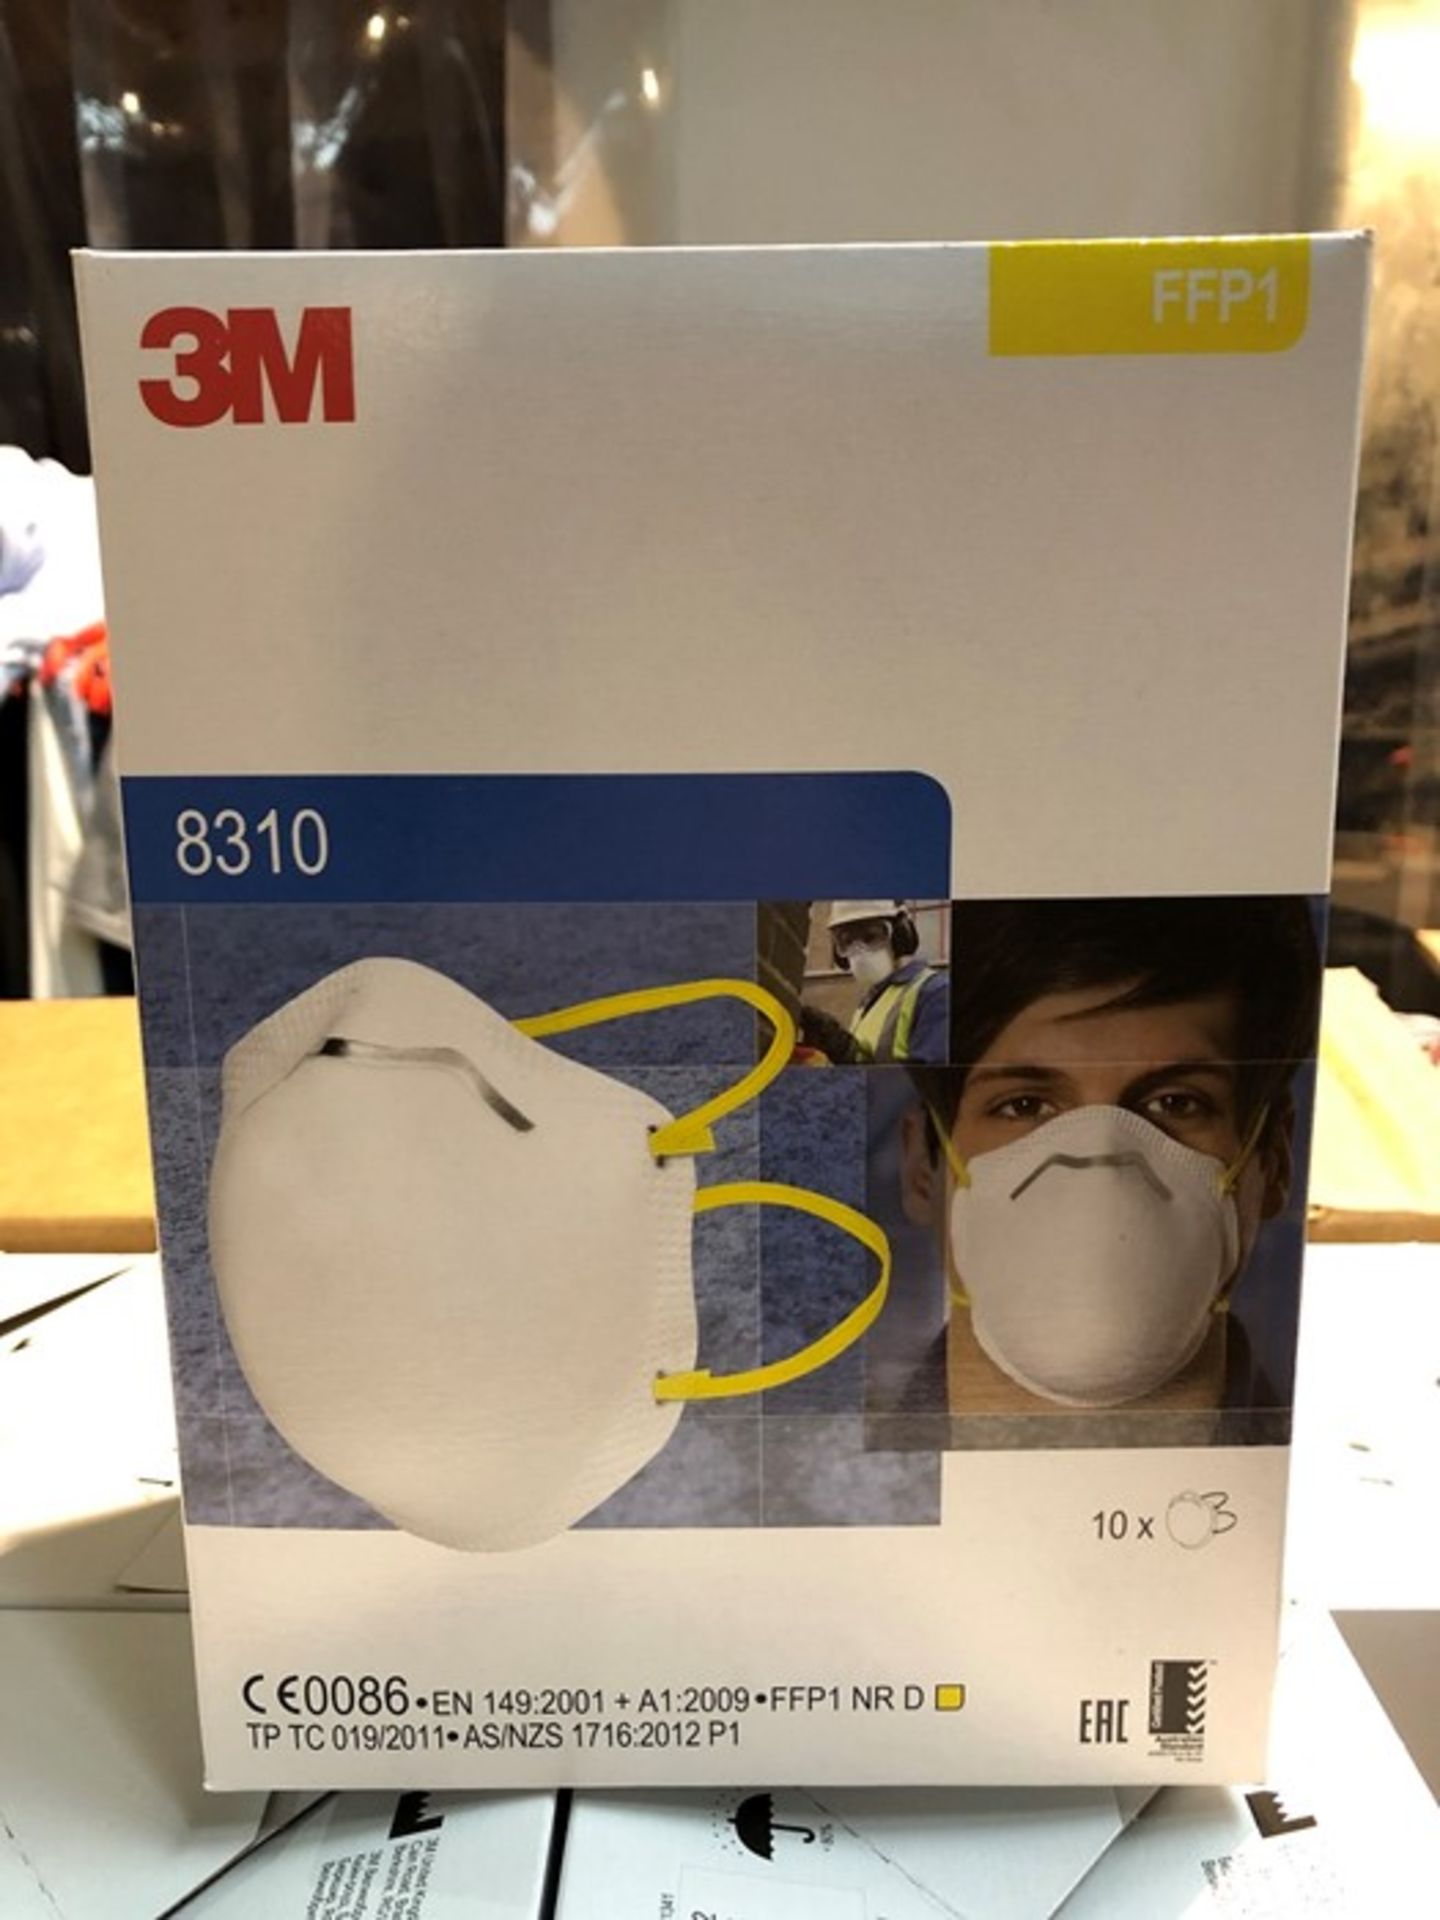 1 BOX OF 3M PARTICULATE RESPIRATORS - 10 PER BOX (PUBLIC VIEWING AVAILABLE)